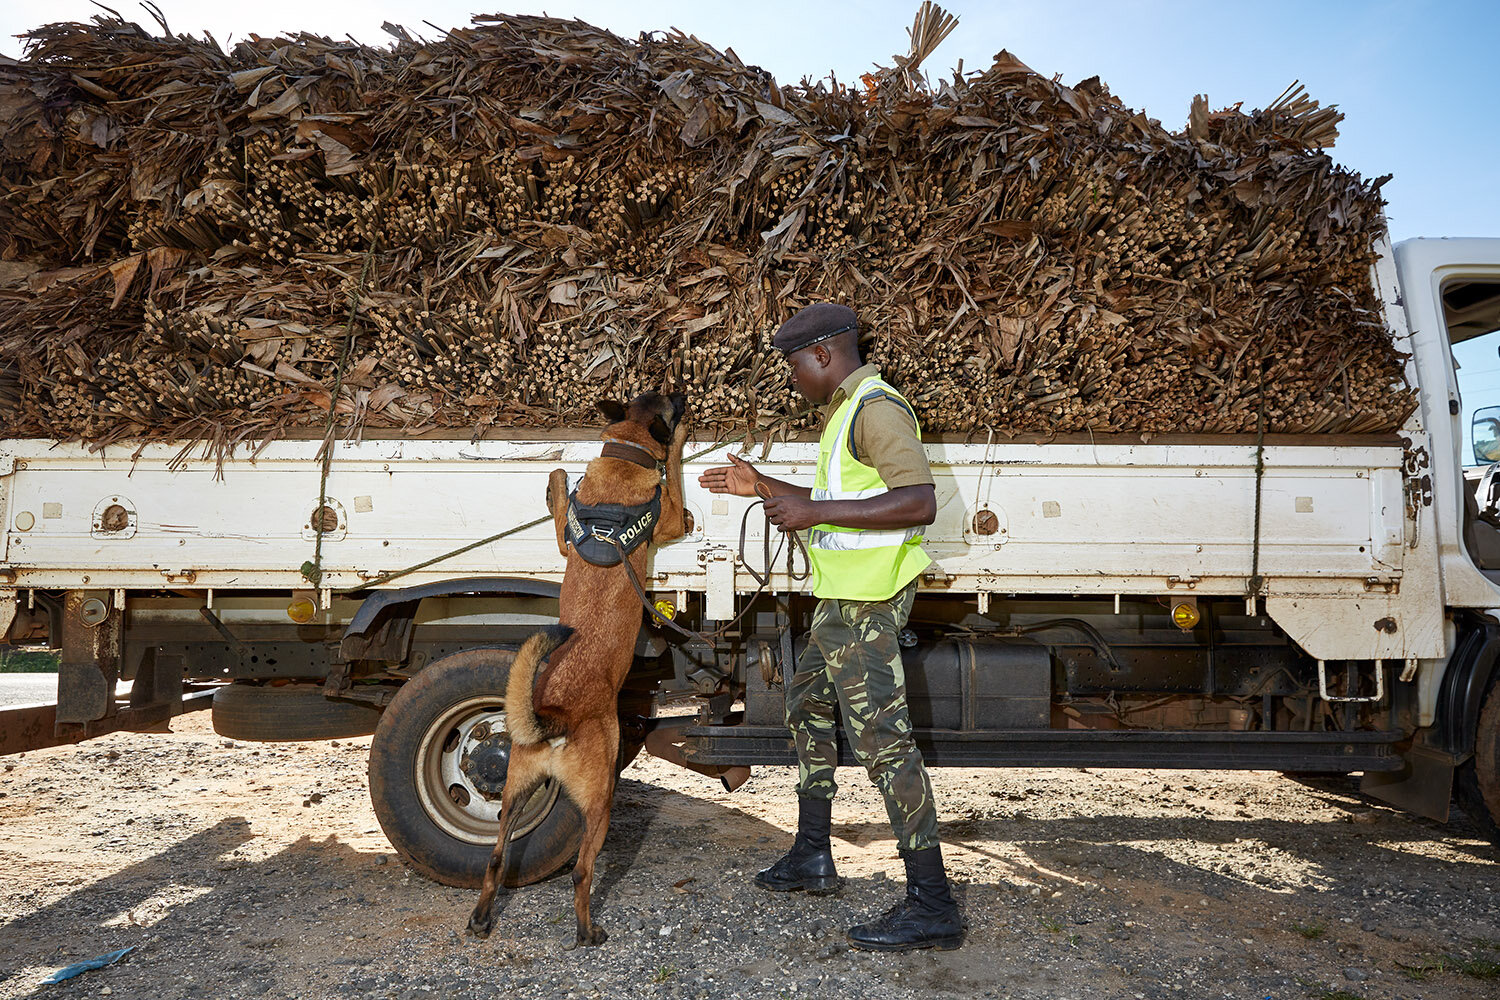  WDDU handler Peter and dog Tim search a truck loaded with elephant grass at a police road block, Lilongwe, Malawi, 2020. 